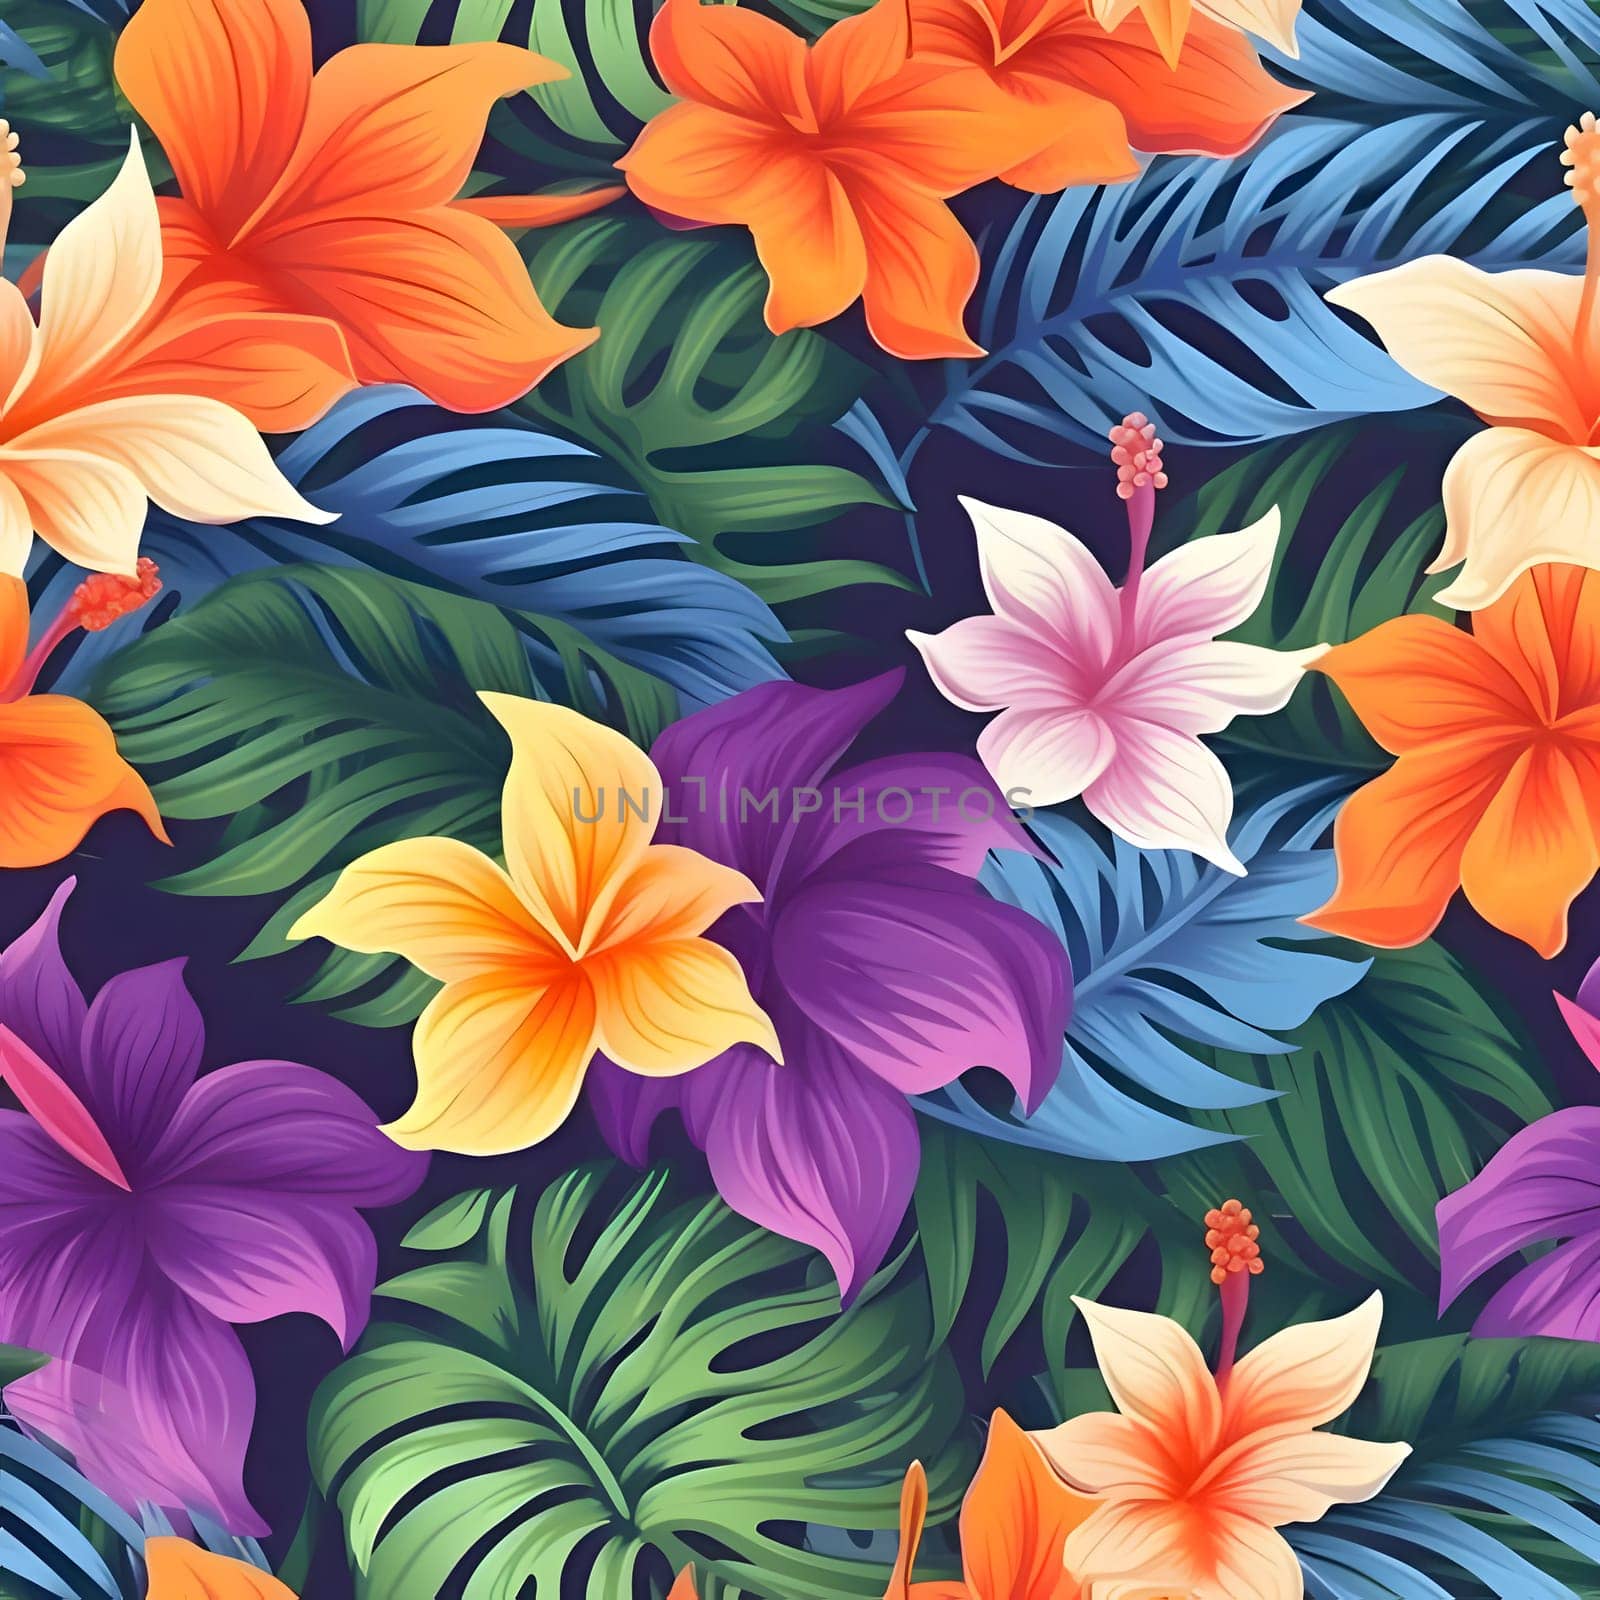 Patterns and banners backgrounds: Seamless pattern with tropical flowers and leaves. Vector illustration.